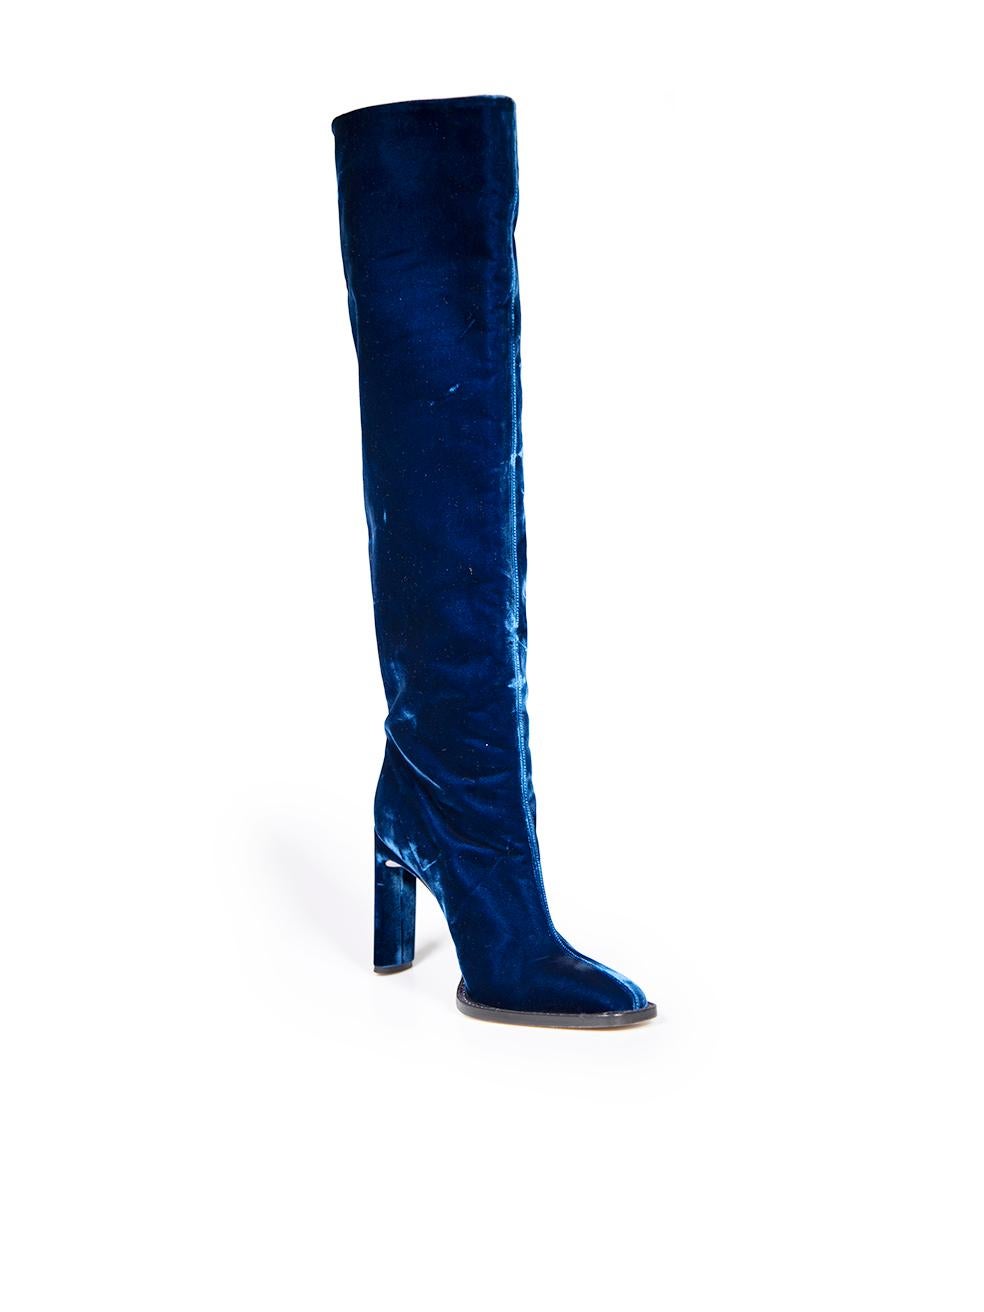 CONDITION is Very good. Minimal wear to boots is evident. Minimal wear to velvet upper leg with very light abrasions to the weave on this used Tamara Mellon designer resale item.
 
 
 
 Details
 
 
 Blue
 
 Velvet
 
 Boots
 
 Over the knee
 
 Square